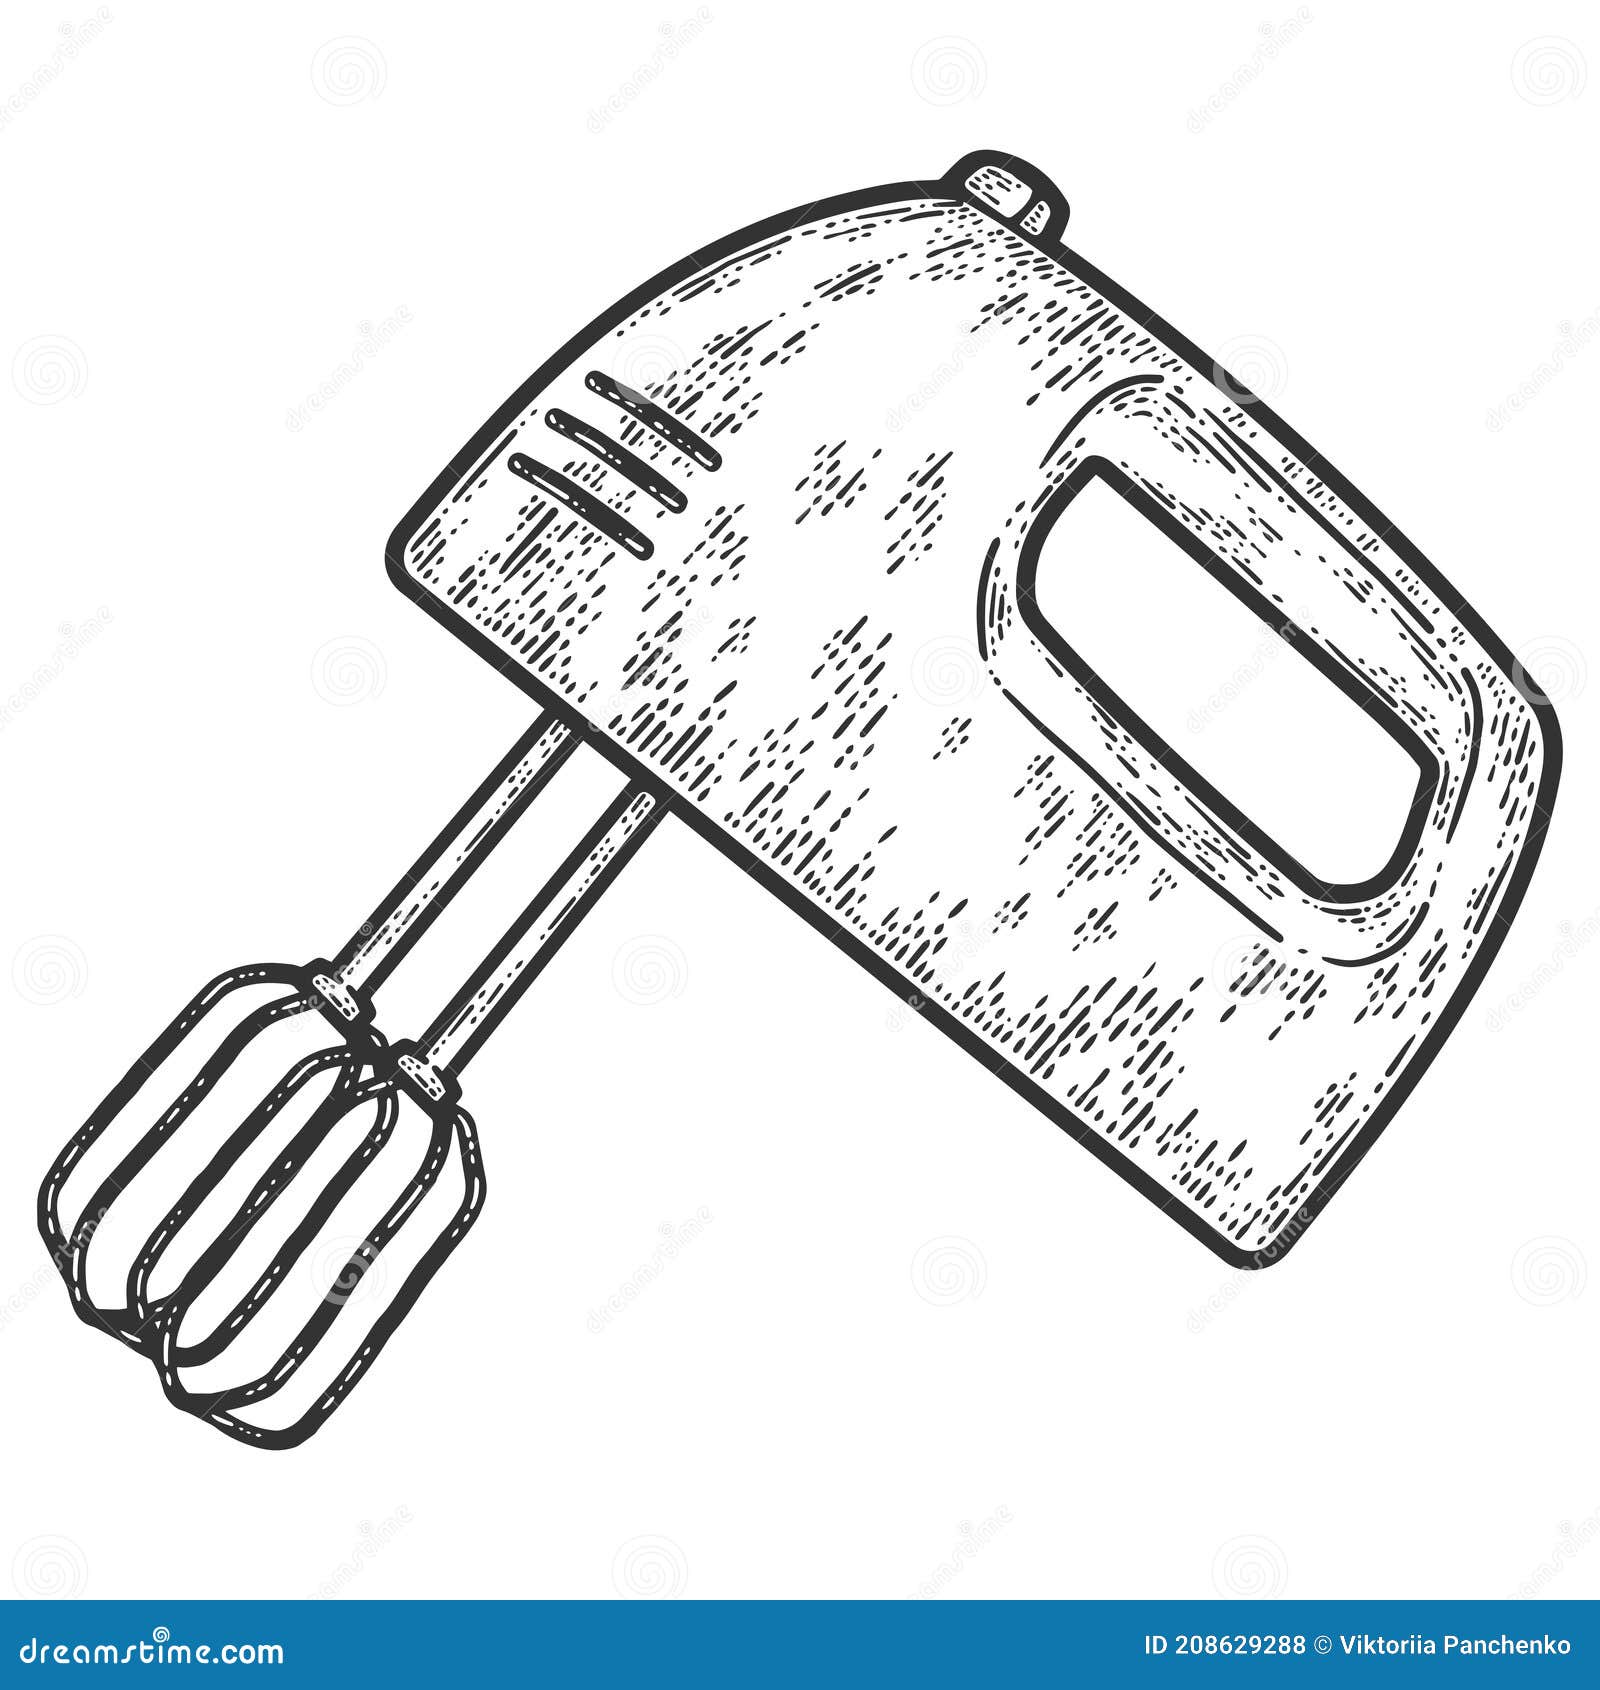 Drawing of isolated hand mixer on the white background:: tasmeemME.com